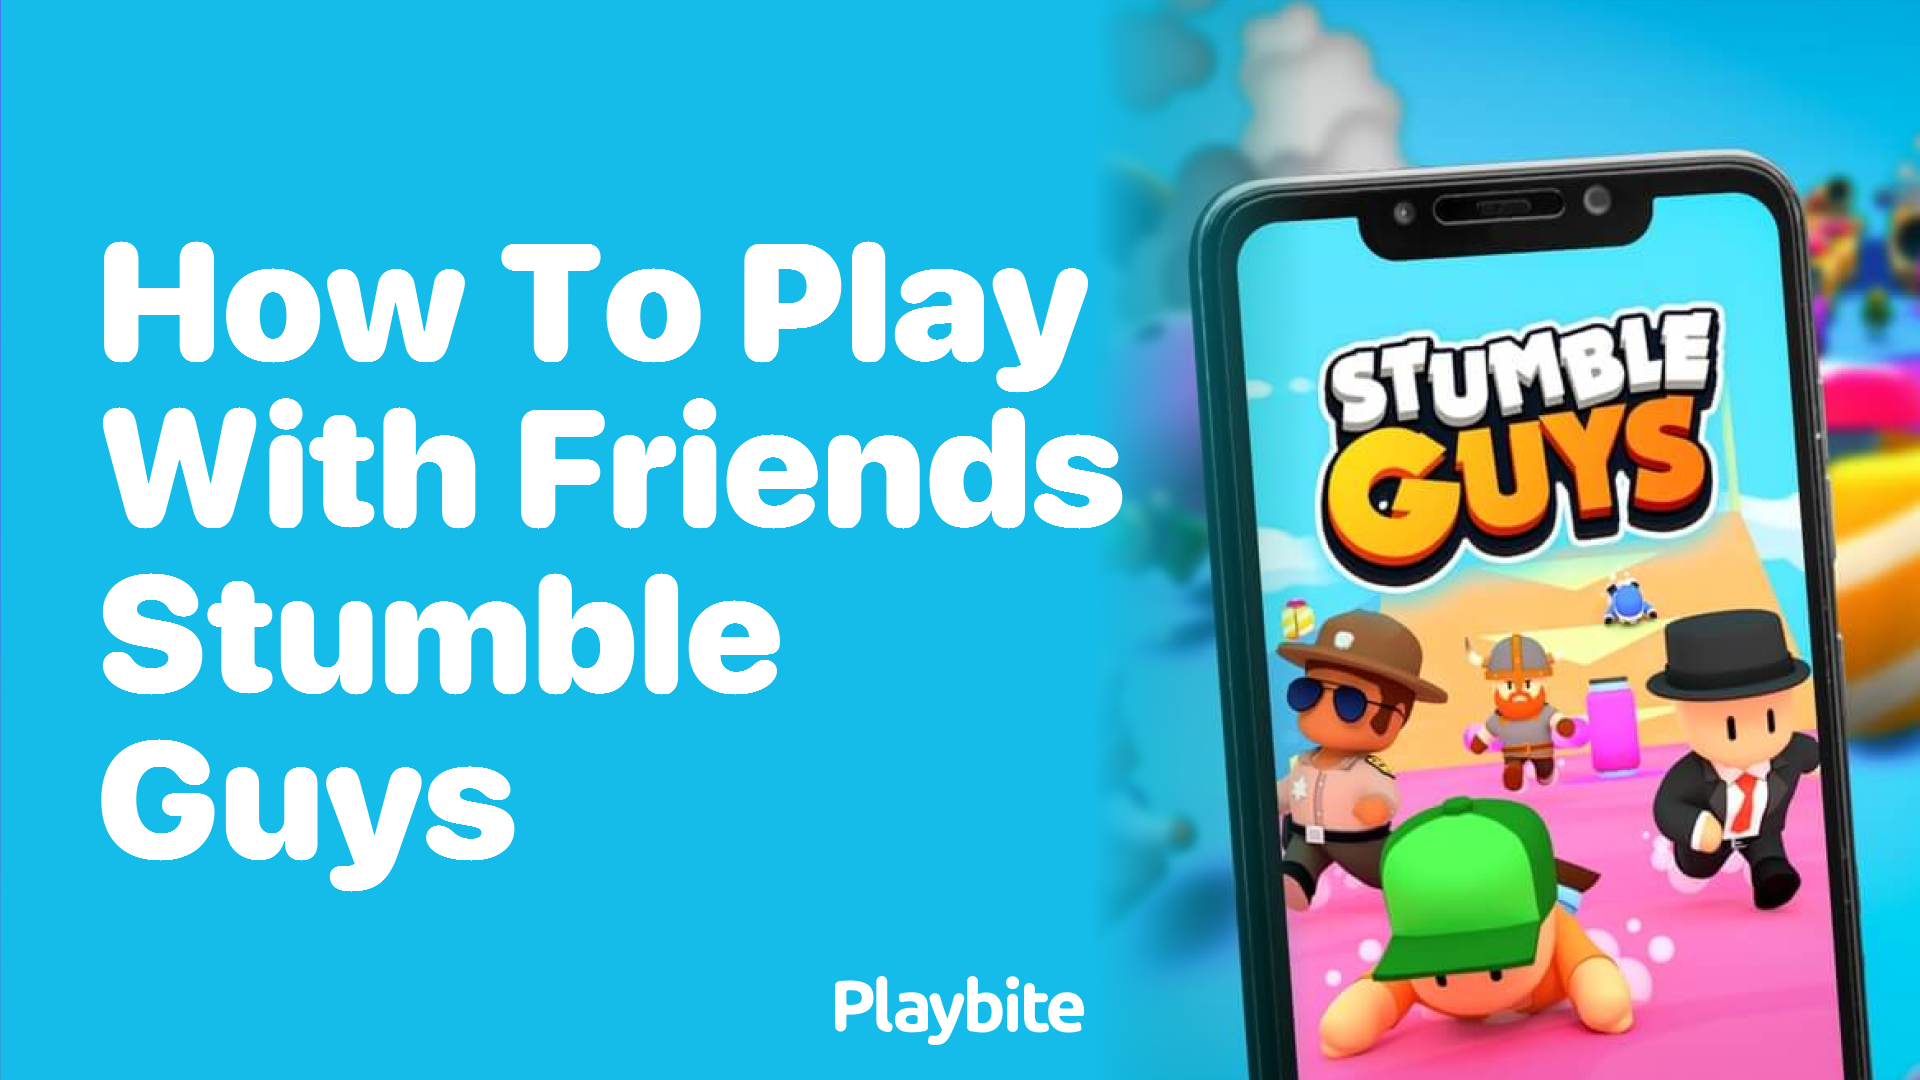 How to Play With Friends in Stumble Guys: A Fun Guide